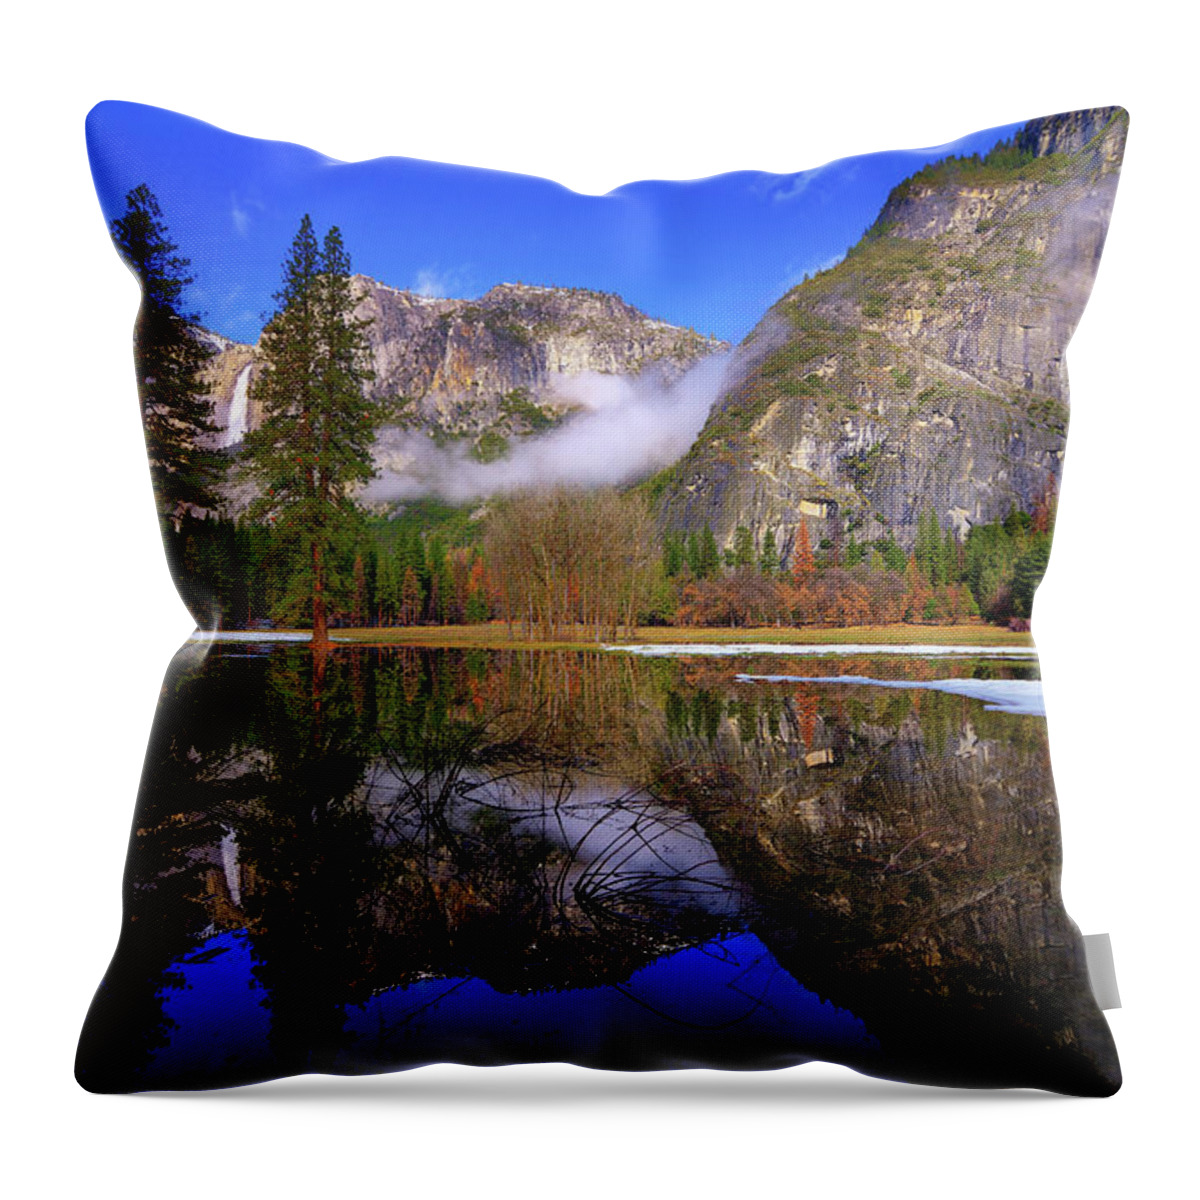 Yosemite Throw Pillow featuring the photograph Yosemite Winter Reflections by Greg Norrell